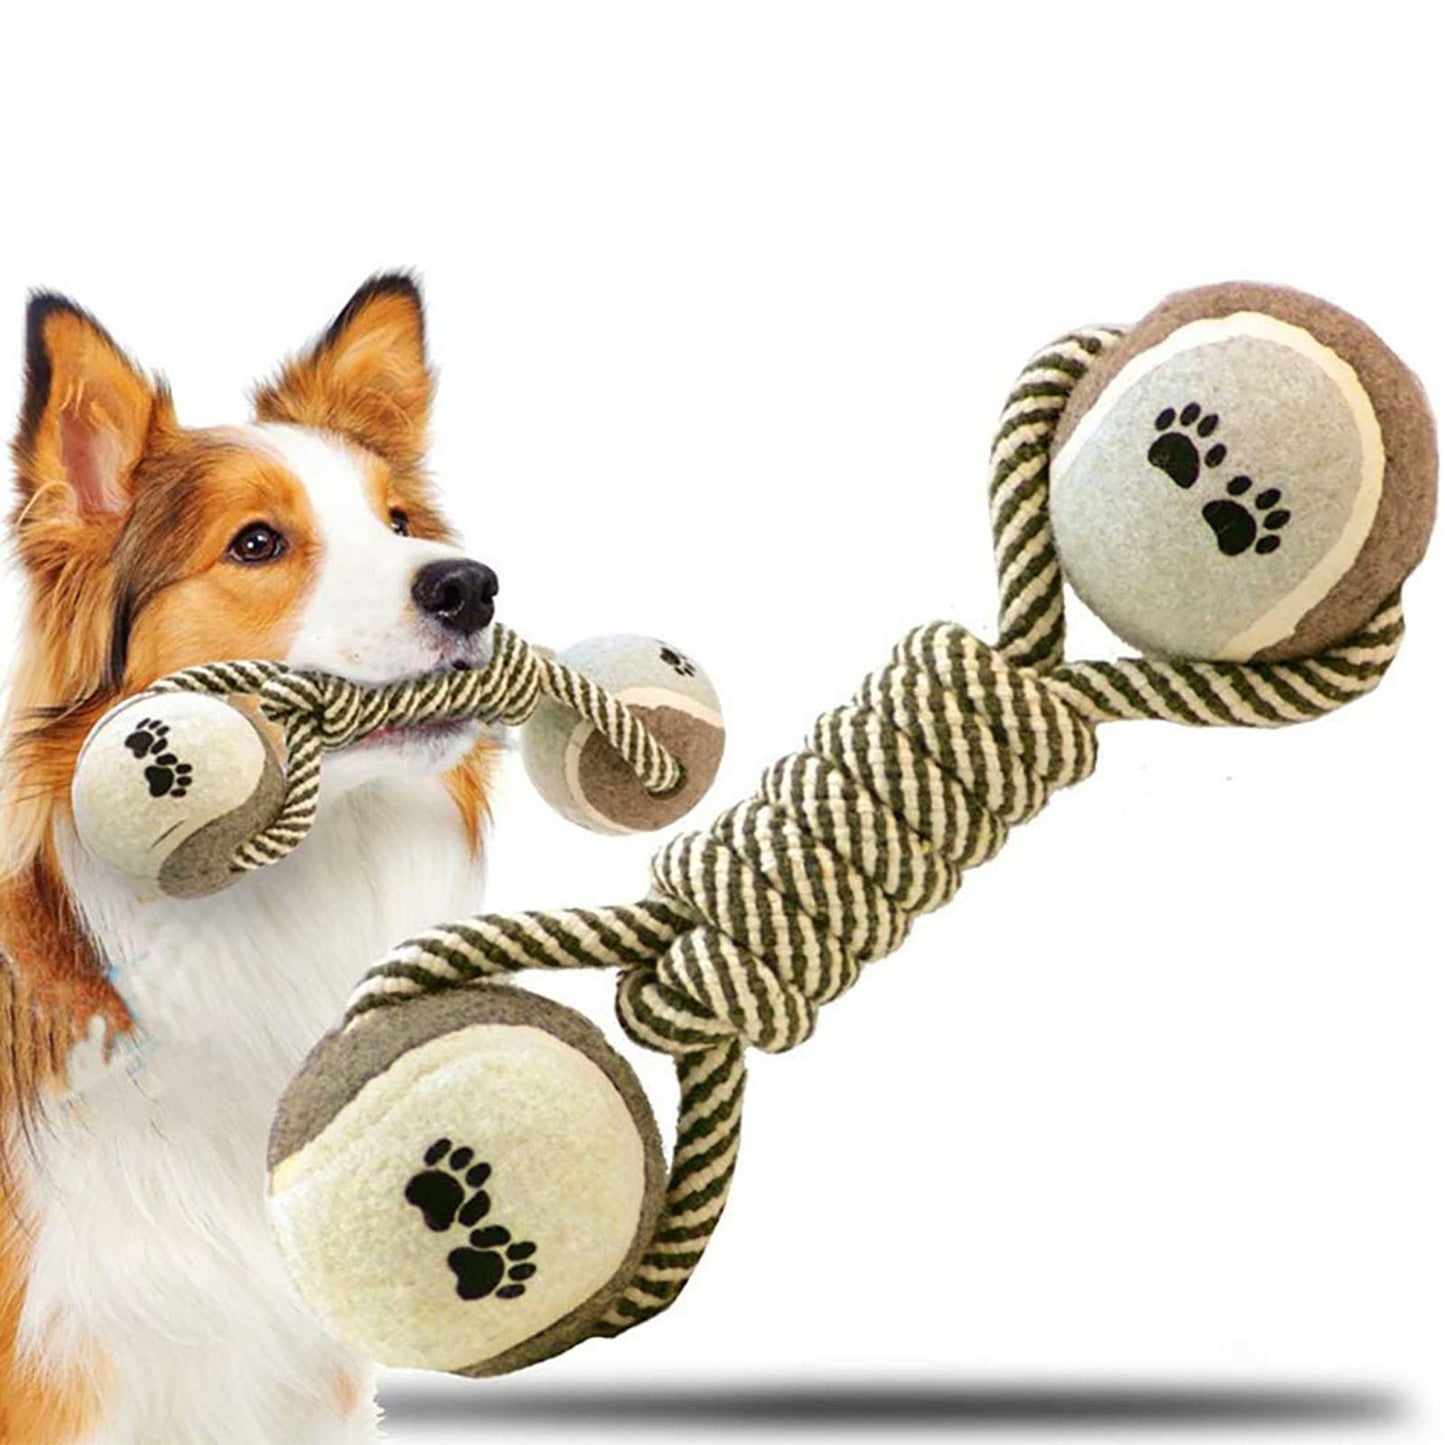 Pet Dog Toys For Large Small Dogs Toy Interactive Cotton Rope